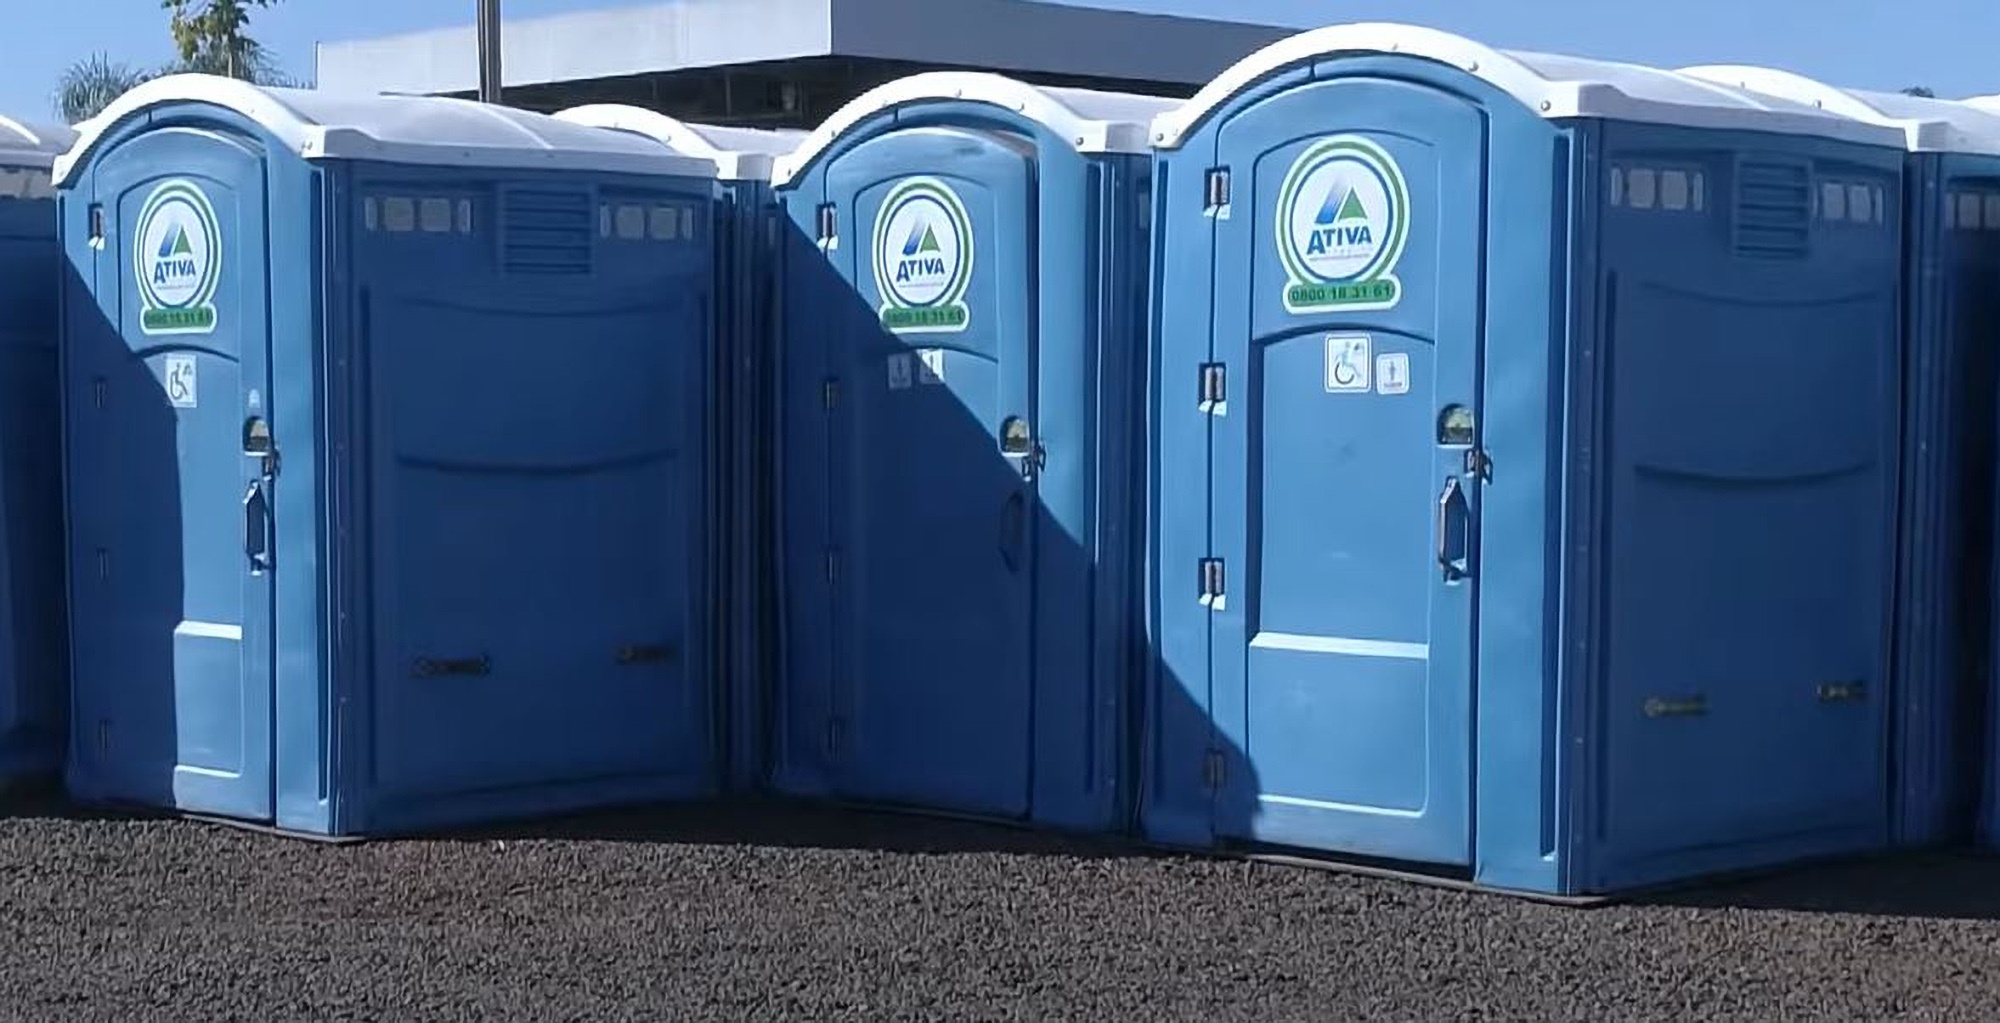 Read more about the article LAV SHACK: Man Stole Portaloo For S3x With Girlfriend